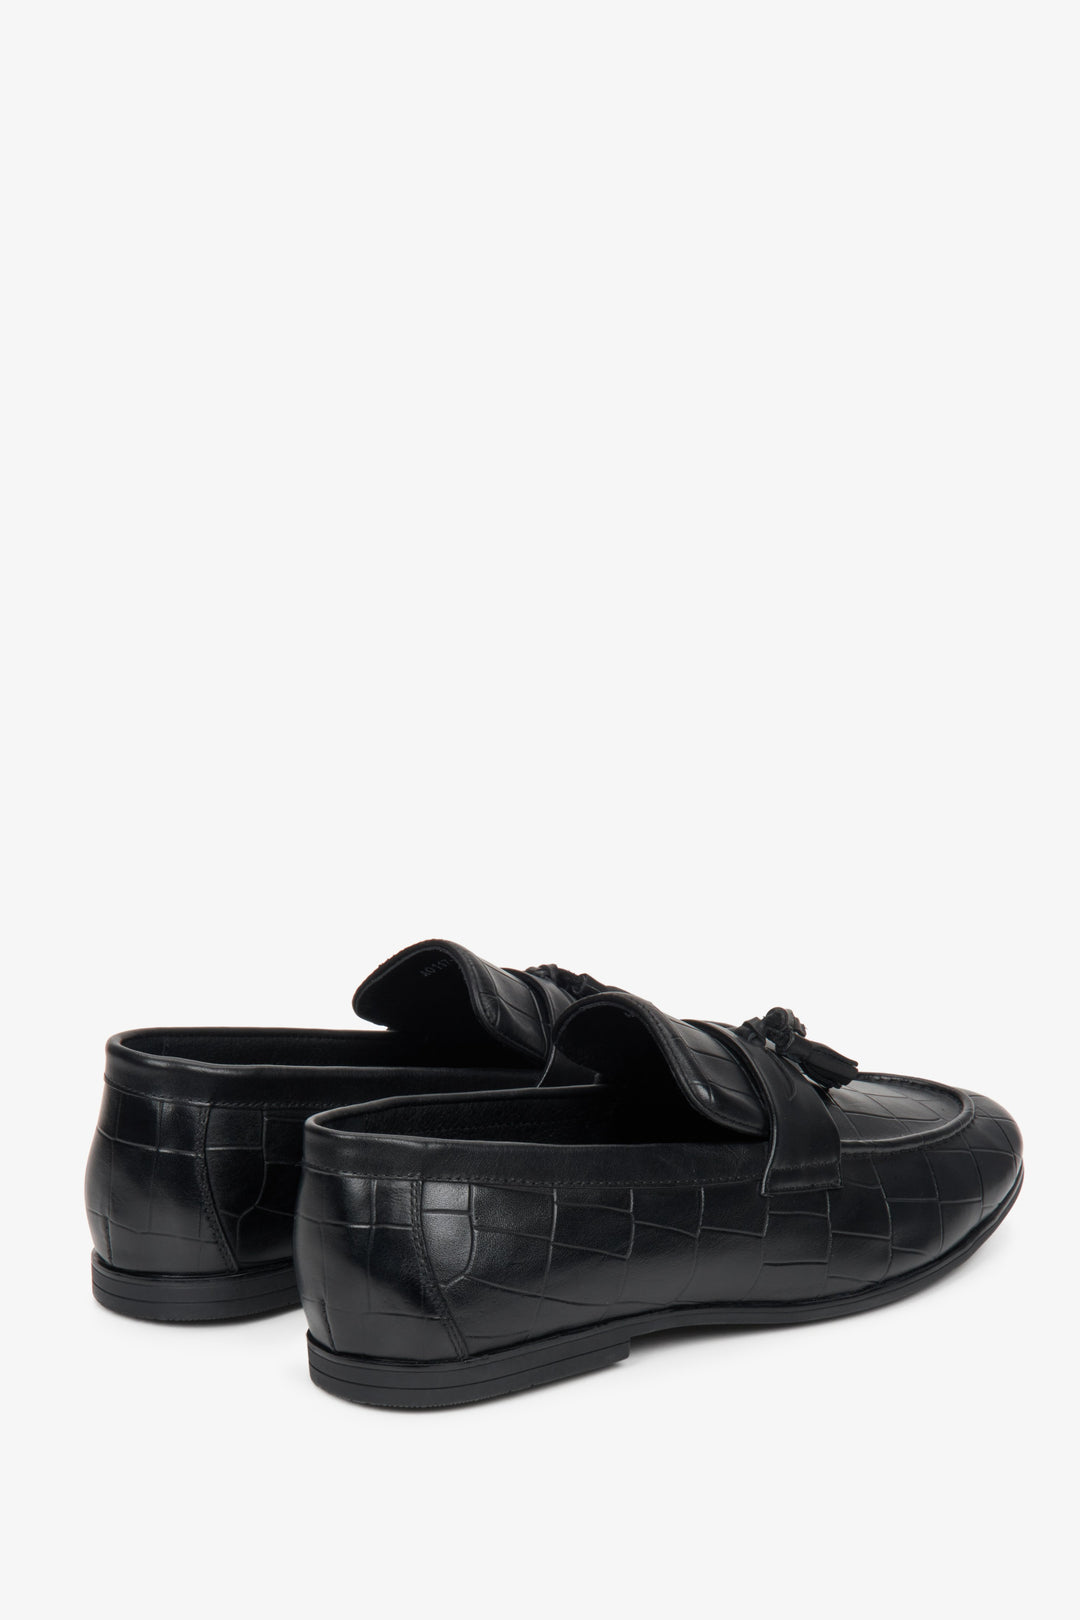 Men's black loafers by Estro - close-up of the heel and the side of the shoe.